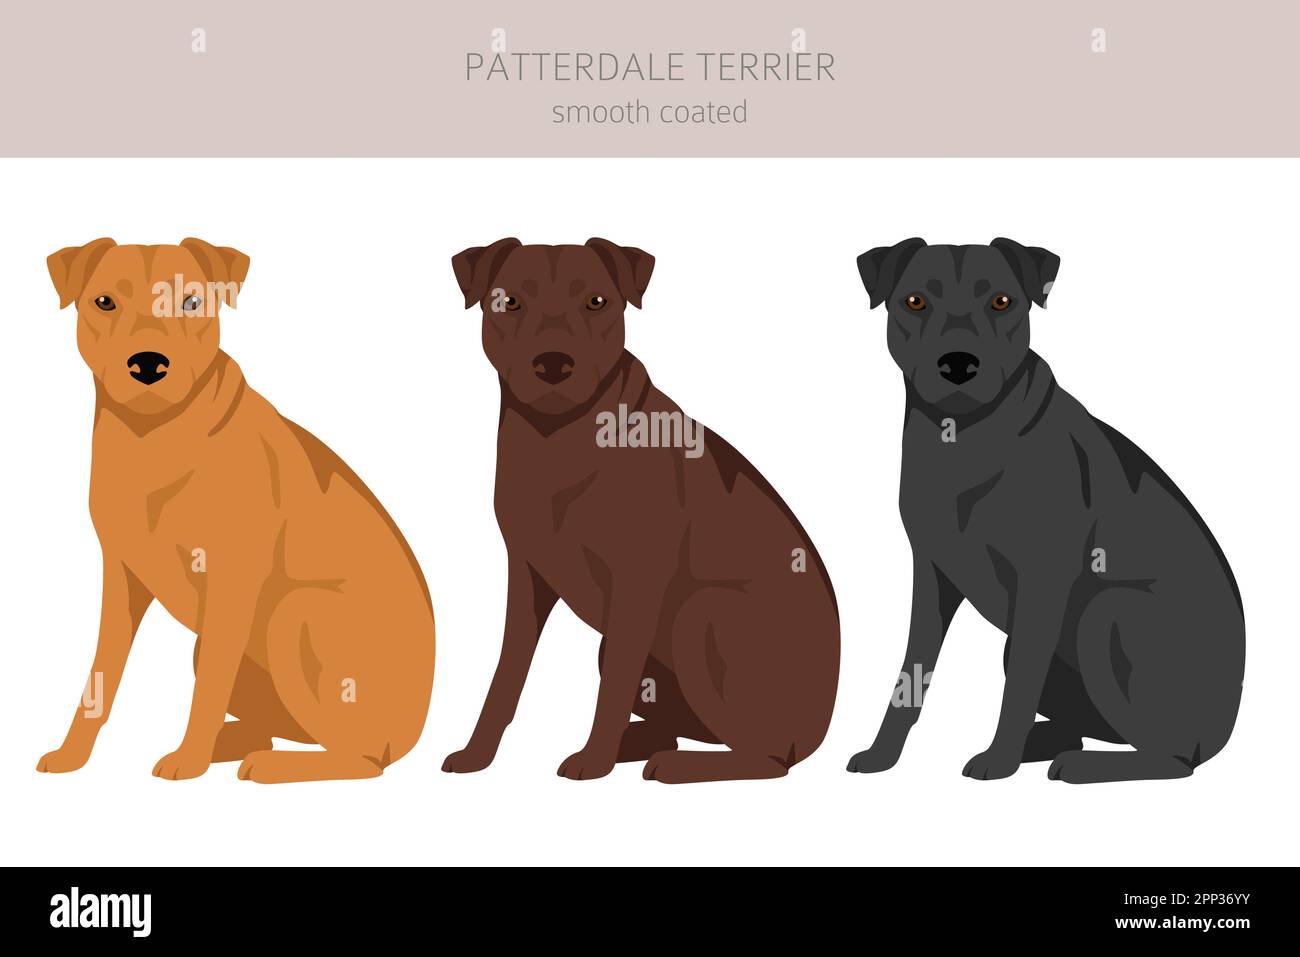 Patterdale terrier smooth coated clipart. All coat colors set. All dog ...